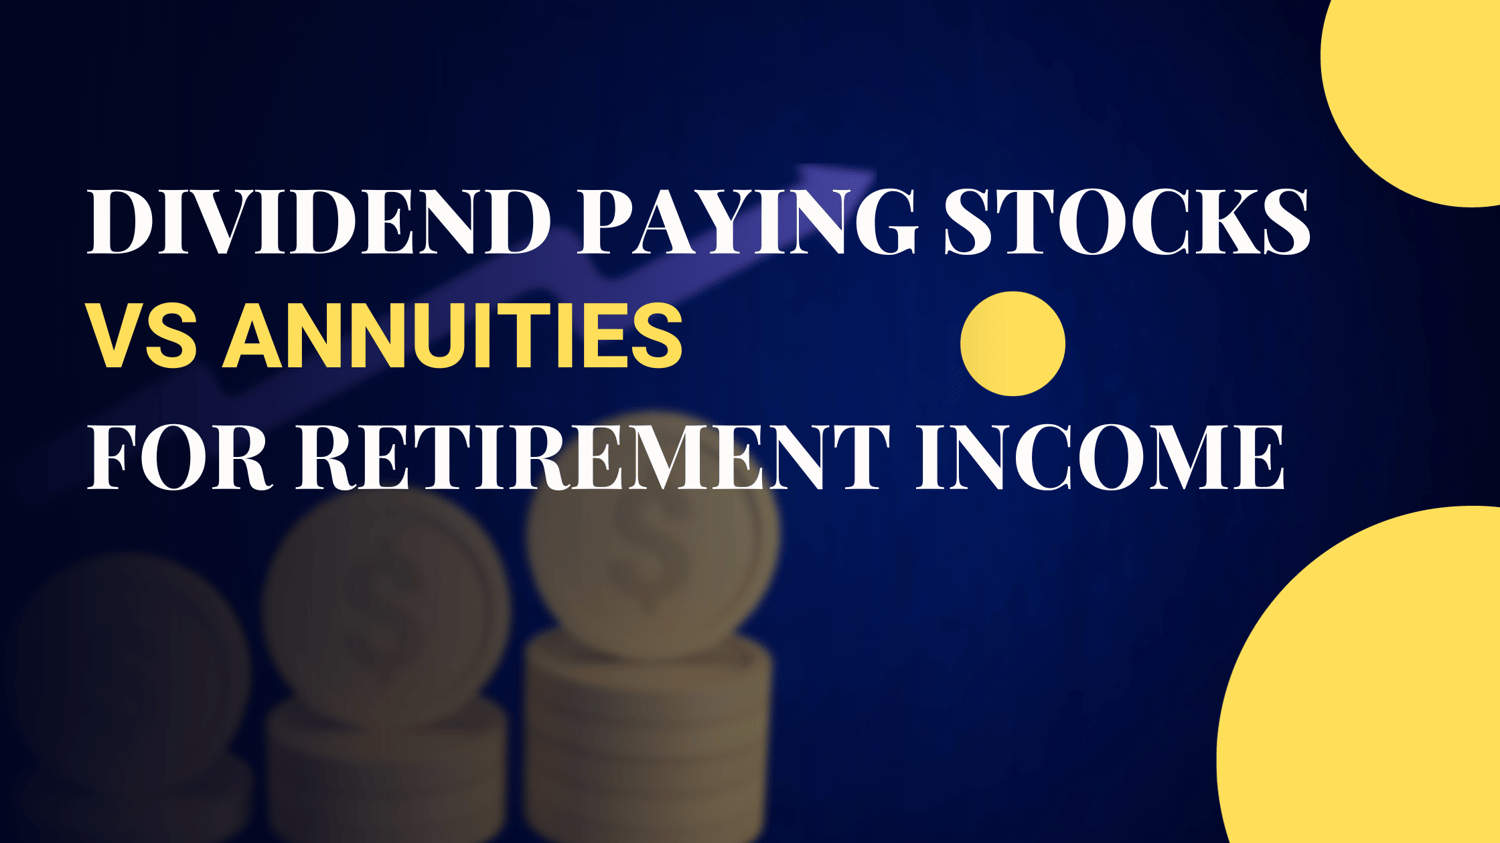 DIVIDEND PAYING STOCKS VS ANNUITIES FOR RETIREMENT INCOME